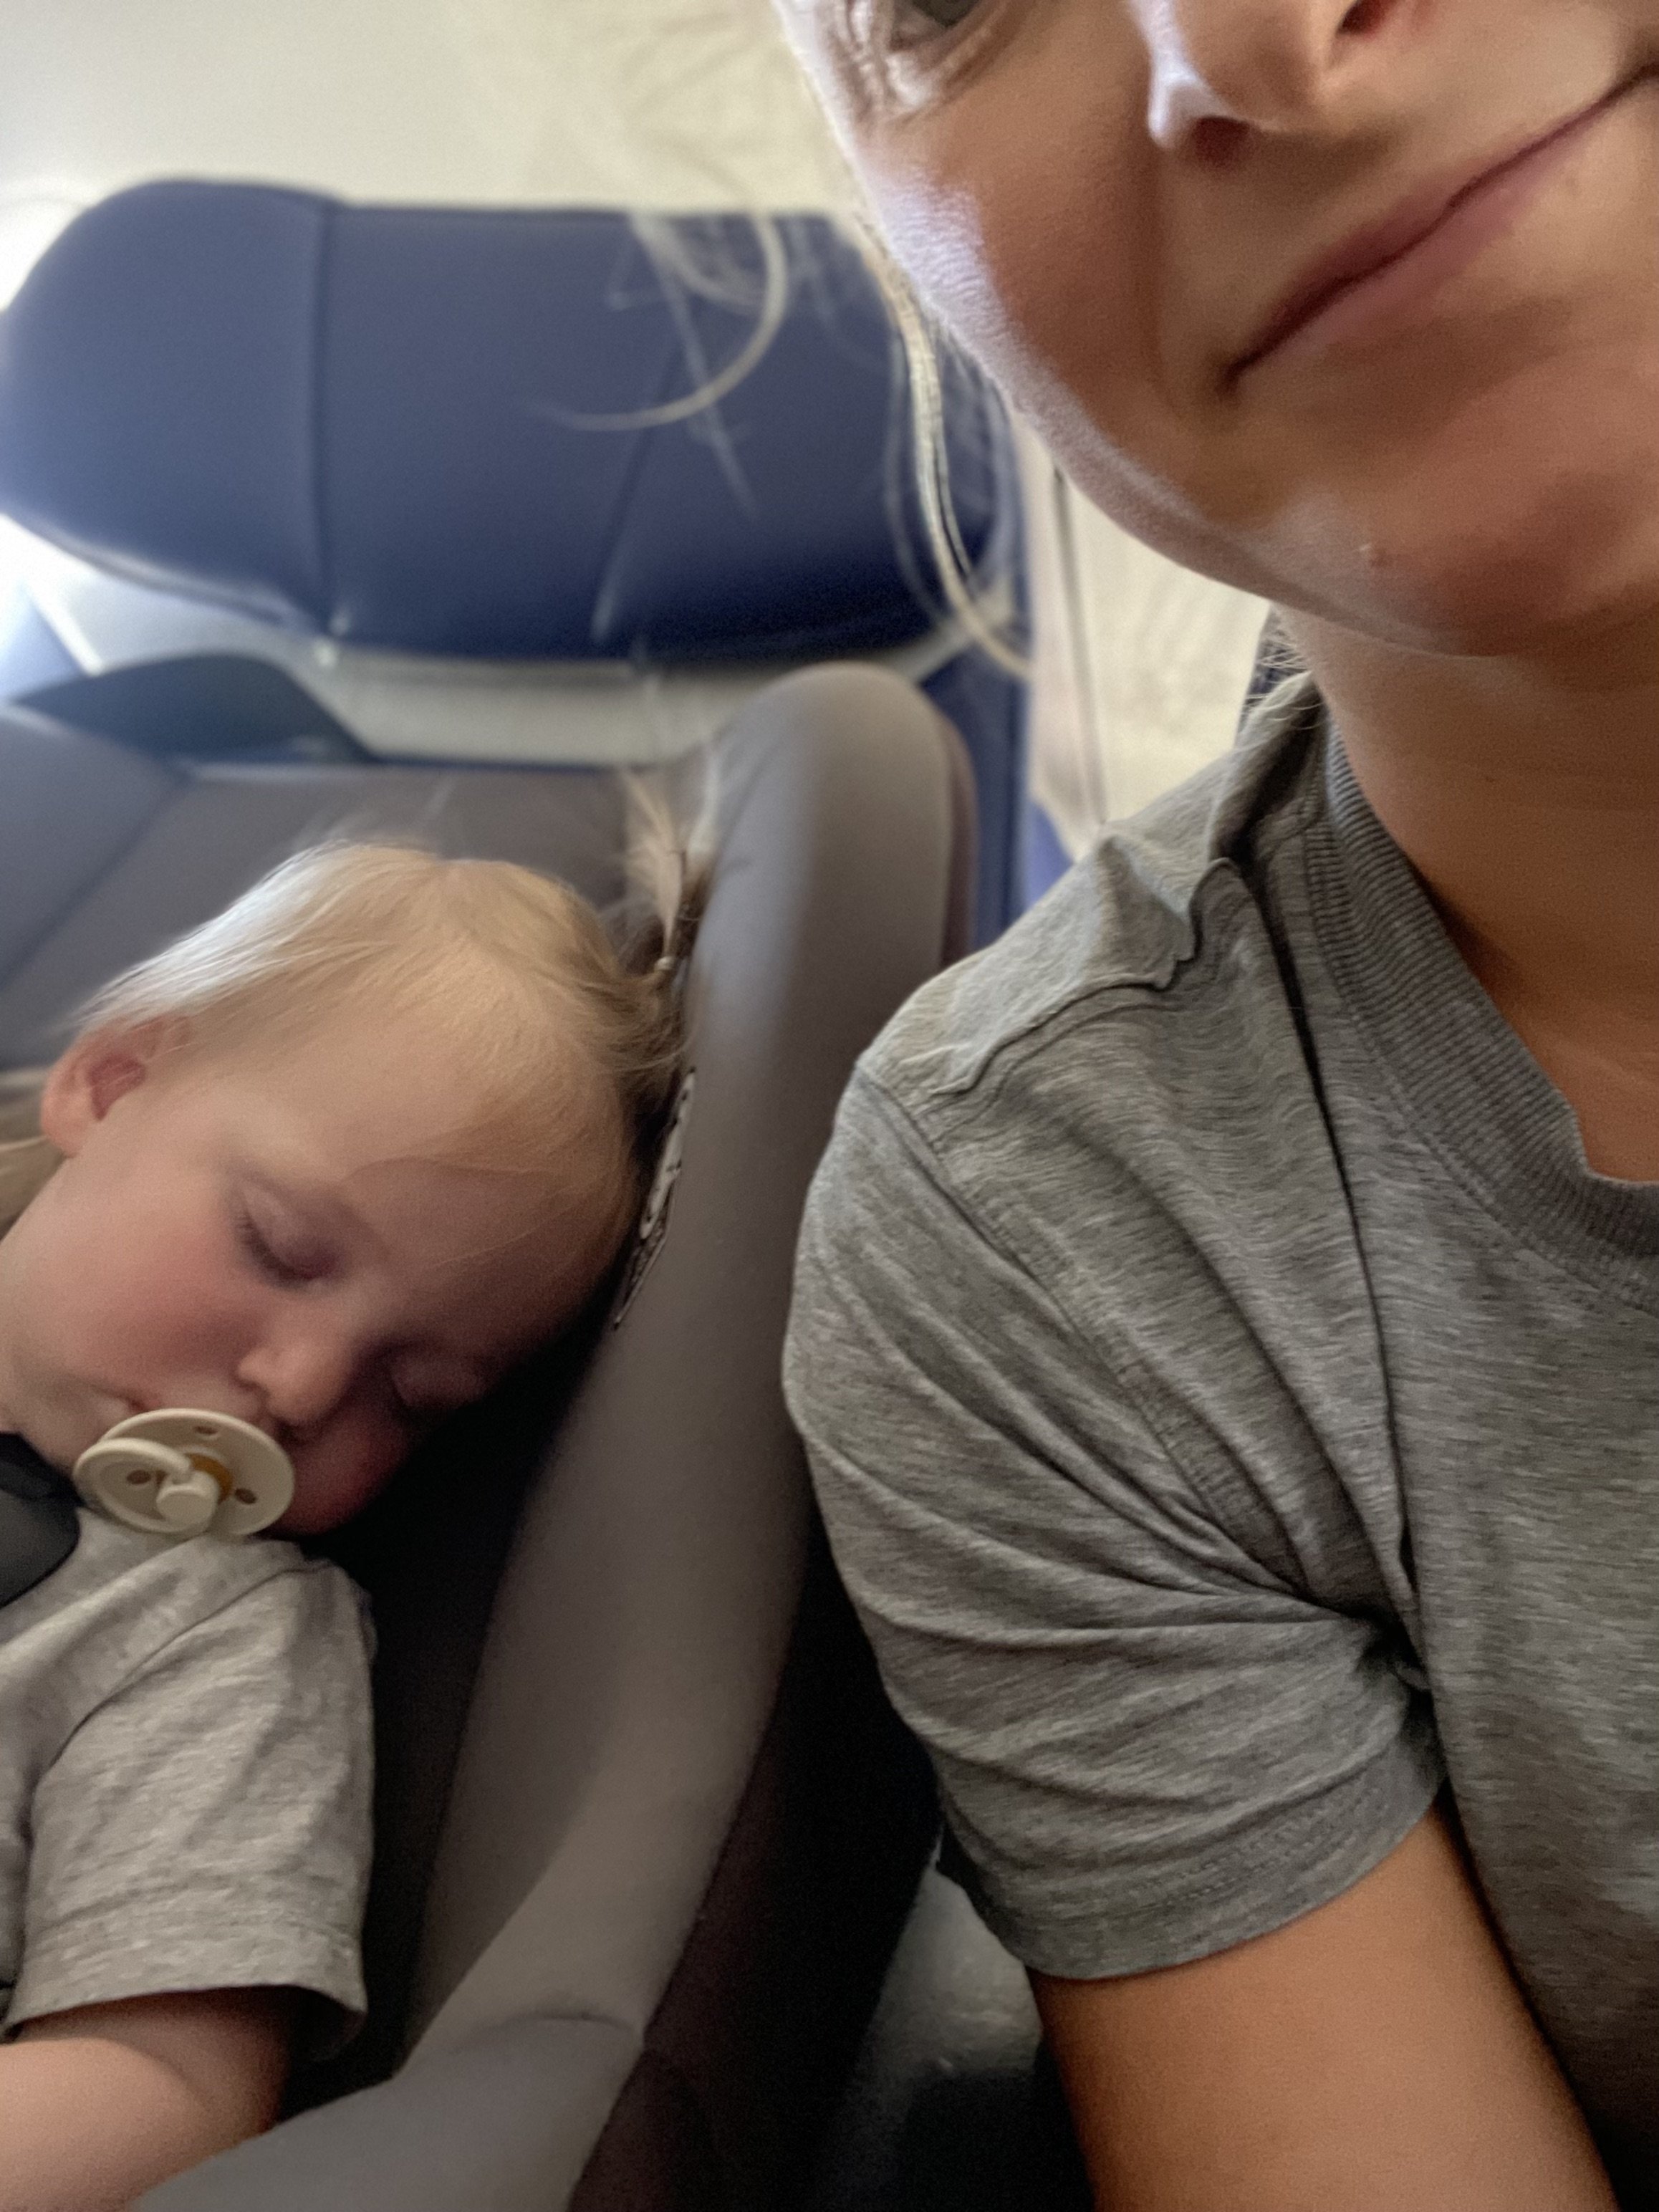 The Best Tips for Traveling with Toddlers - The Sweetest Occasion